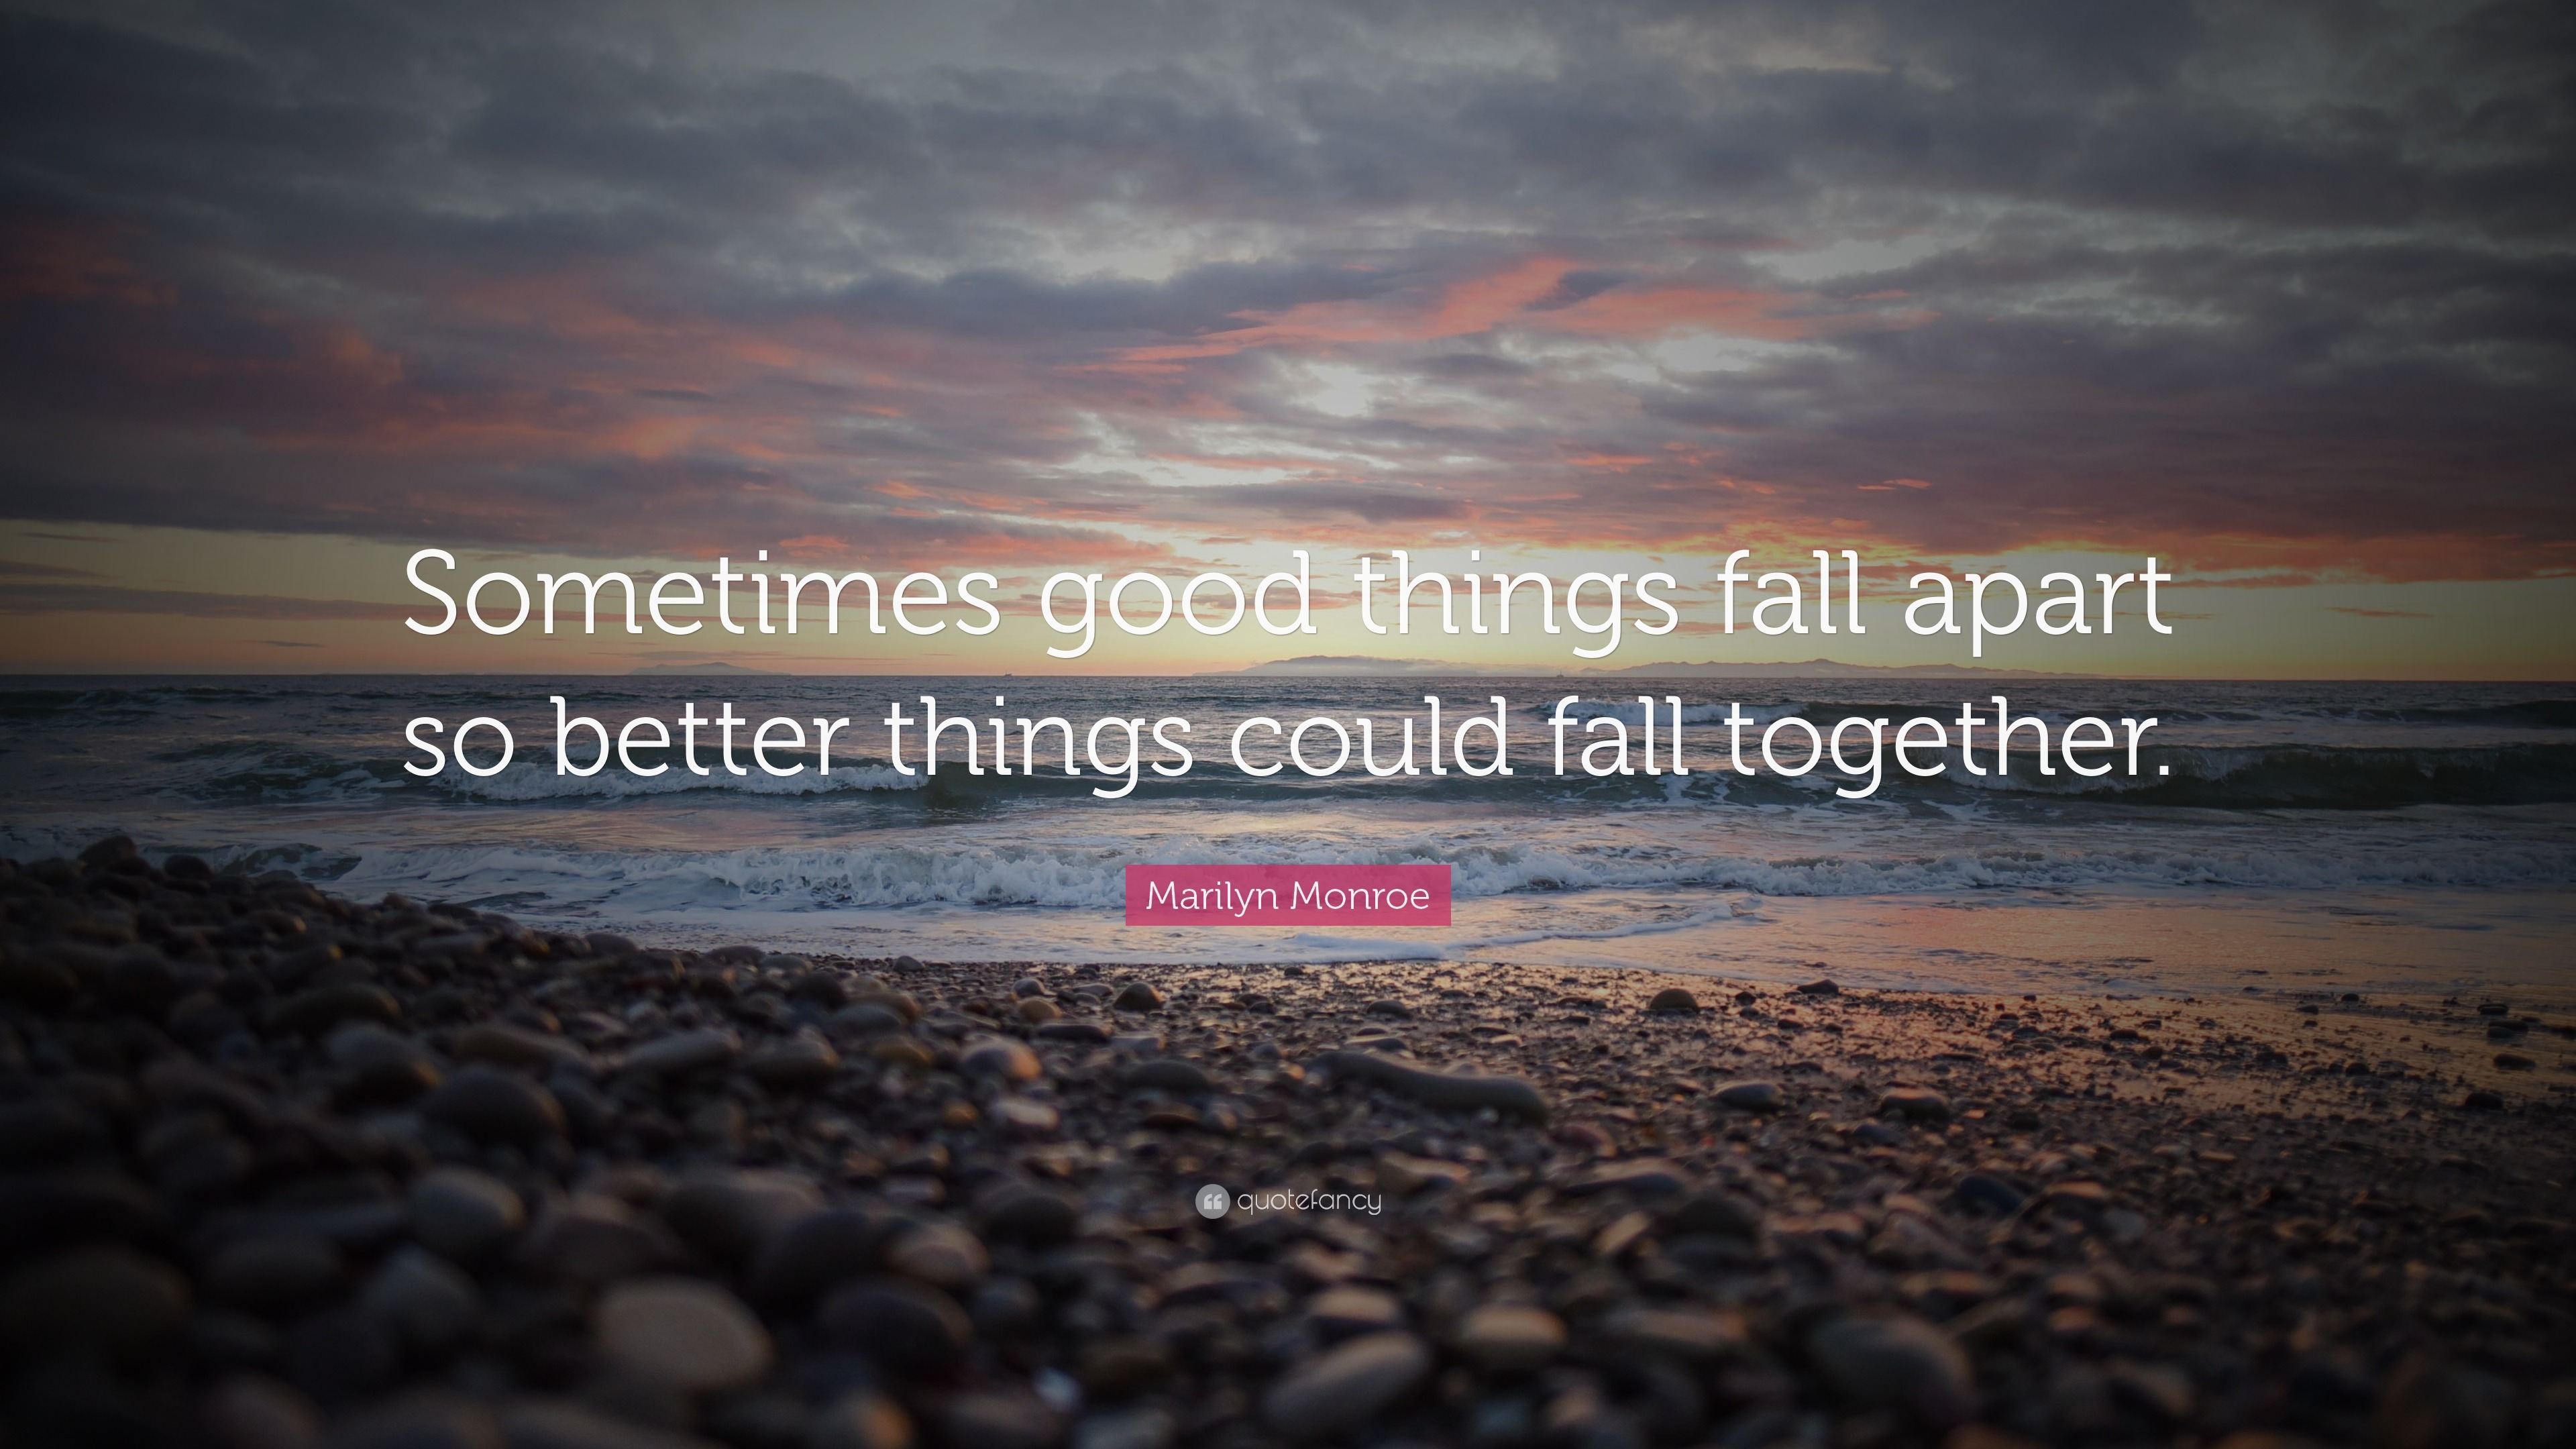 Marilyn Monroe Quote: “Sometimes Good Things Fall Apart So Better Things Could Fall Together.”